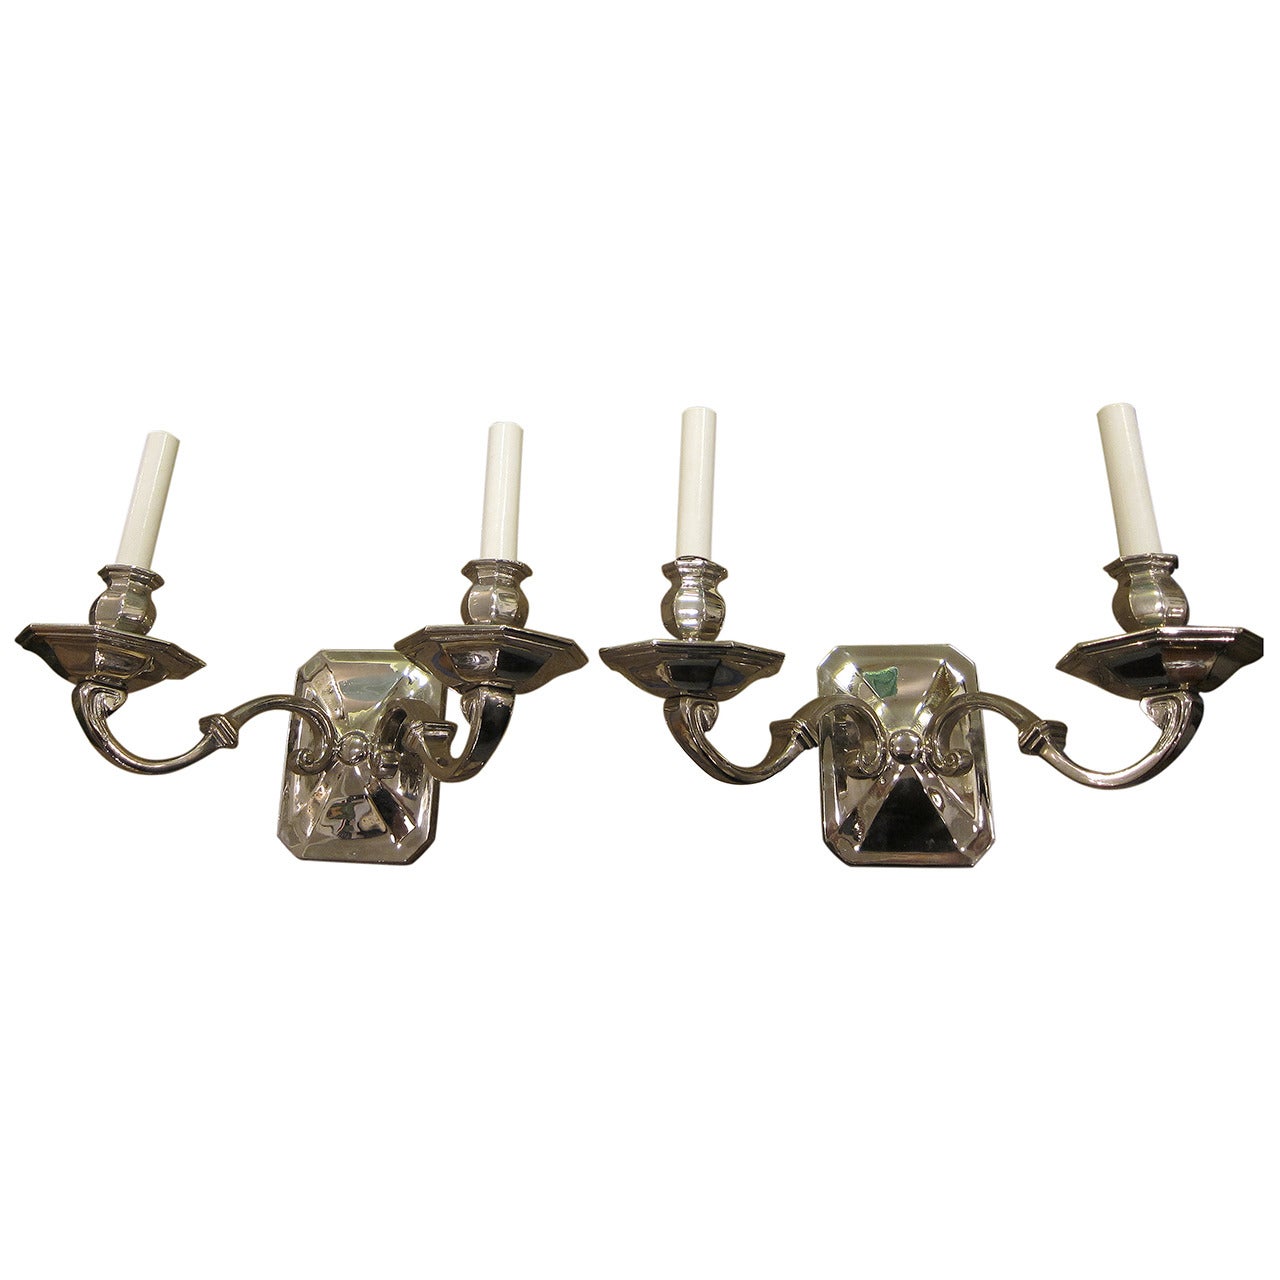 Pair of French Art Deco Polished Nickel Over Bronze Two-Arm Sconces, 1940s